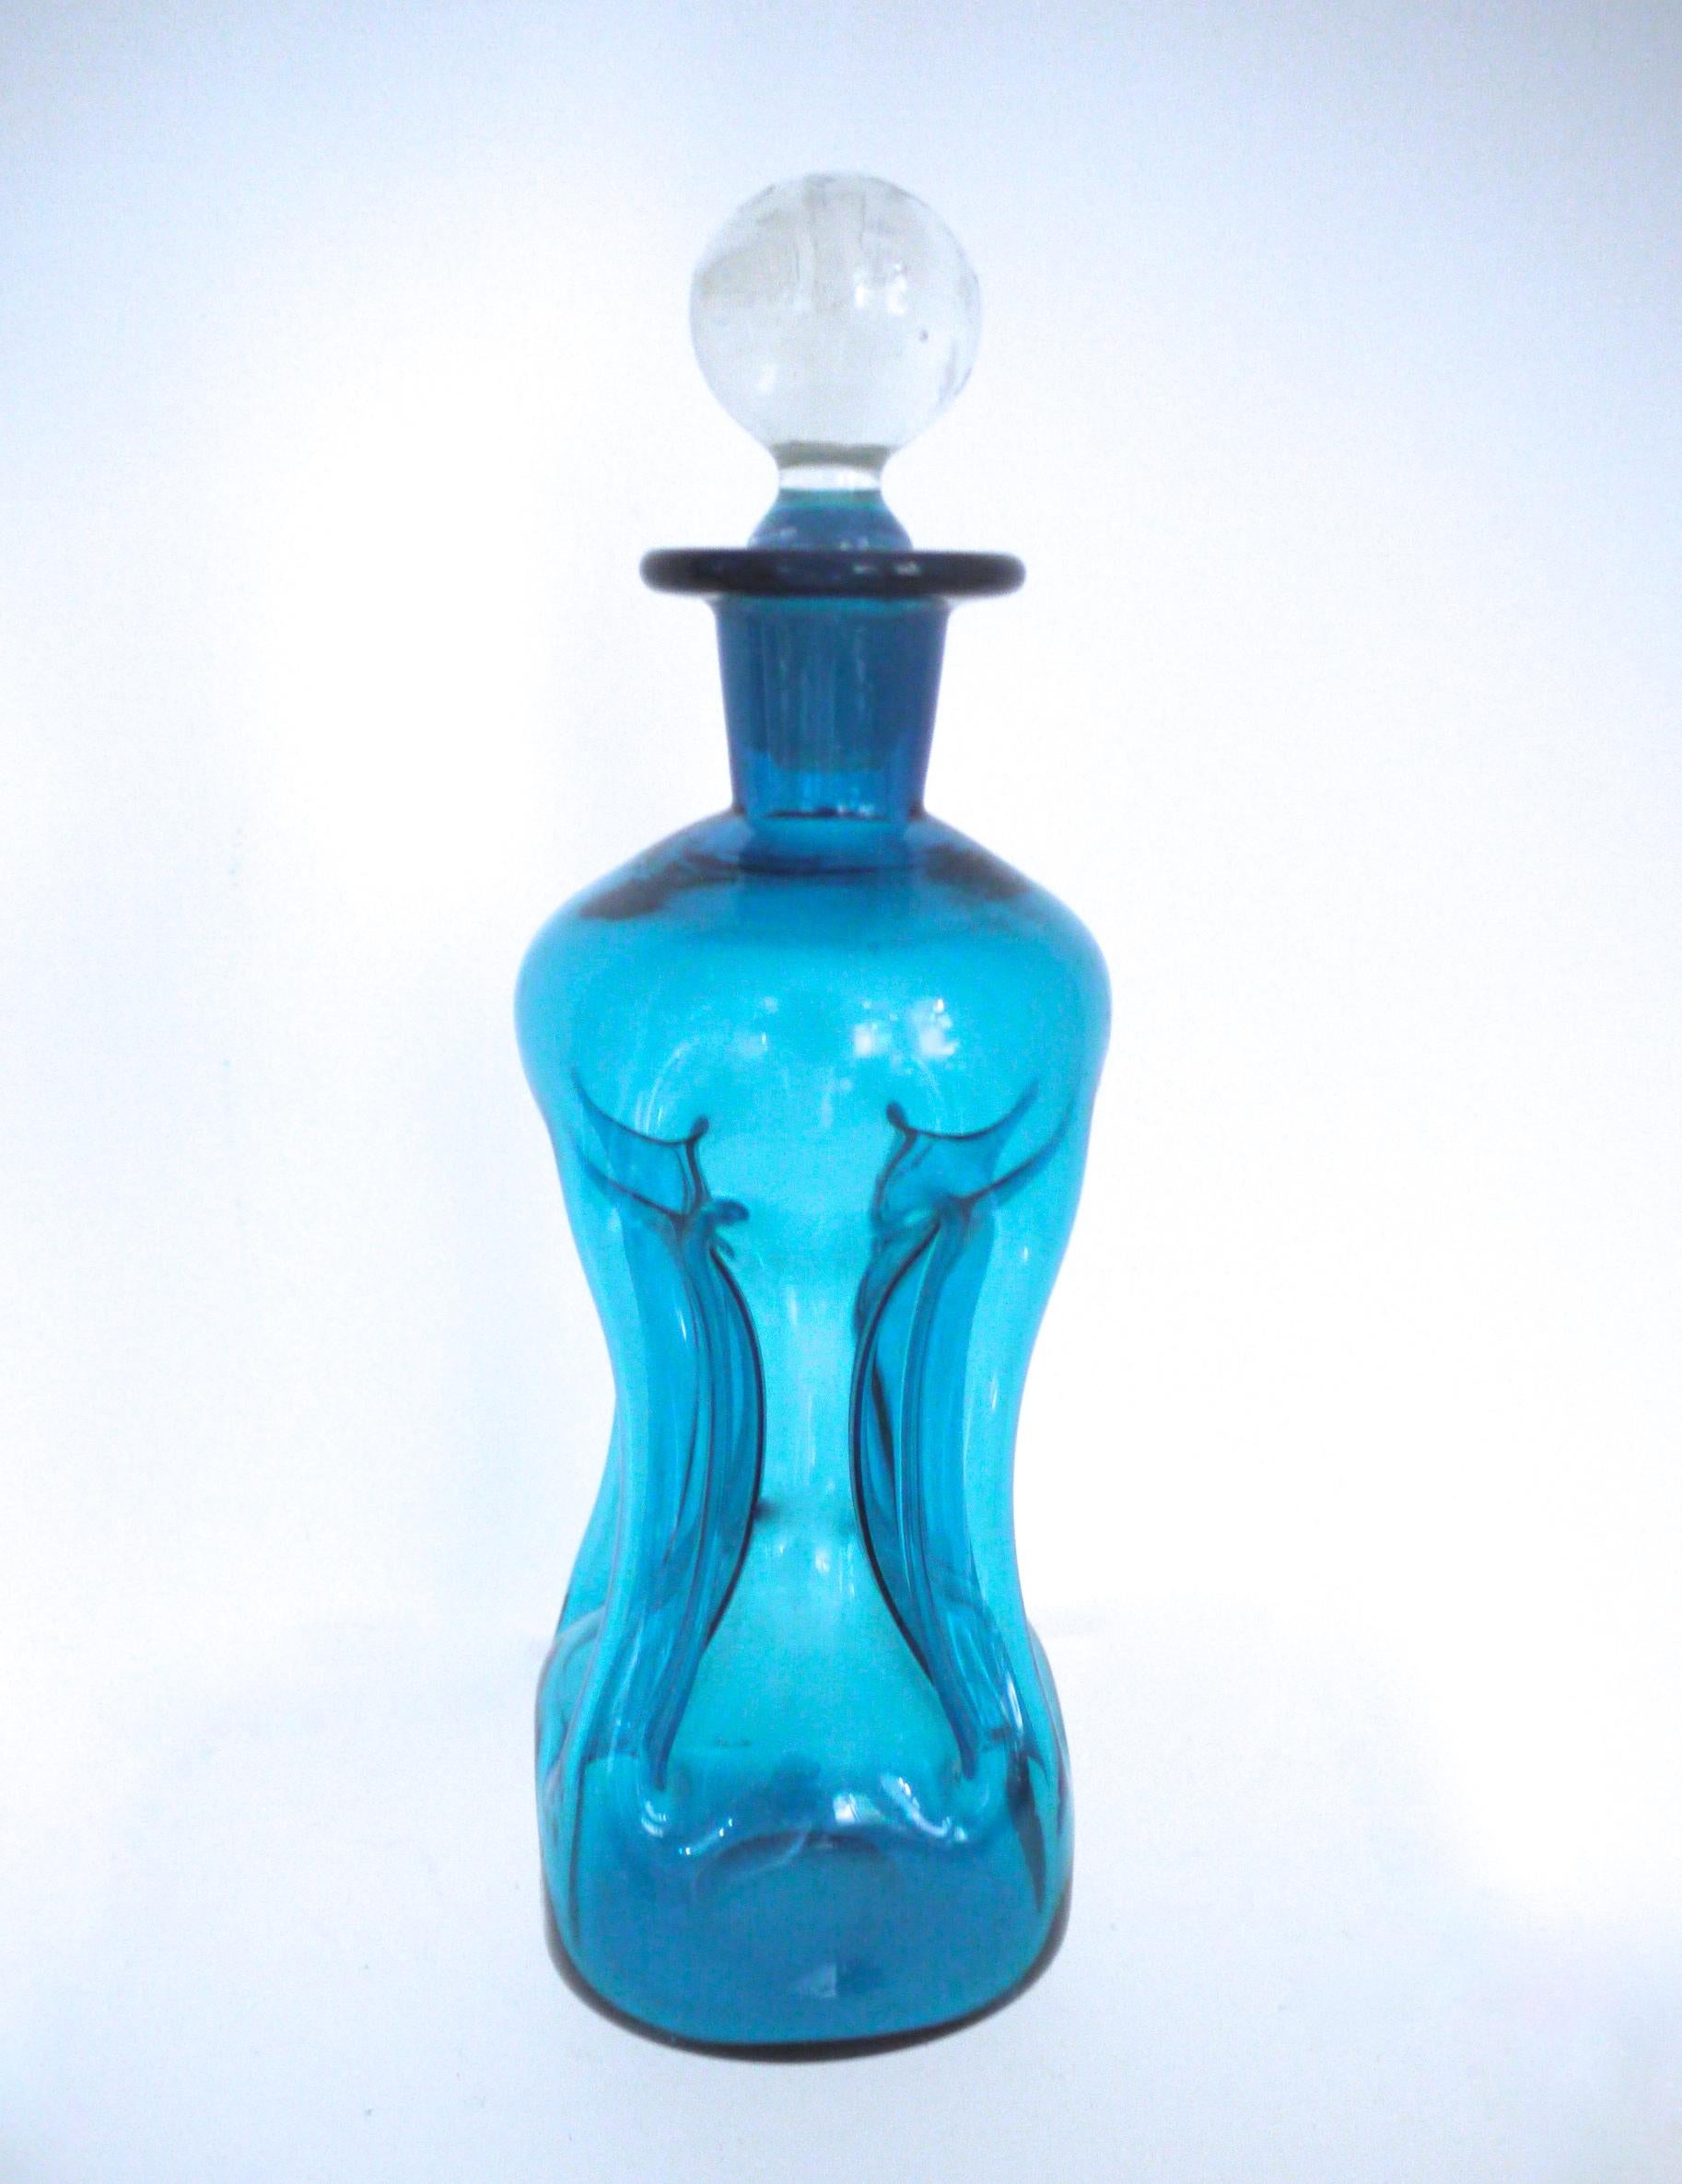 1960s Jacob Bang 'KlukKluk' Kingfisher blue glass decanter a seen on star trek

The iconic Jacob Bang 'Kluk Kluk' kingfisher blue art glass decanter was made by Holmegaard Glassworks of Denmark. Holmegaard traces its origins to 1823 and originally